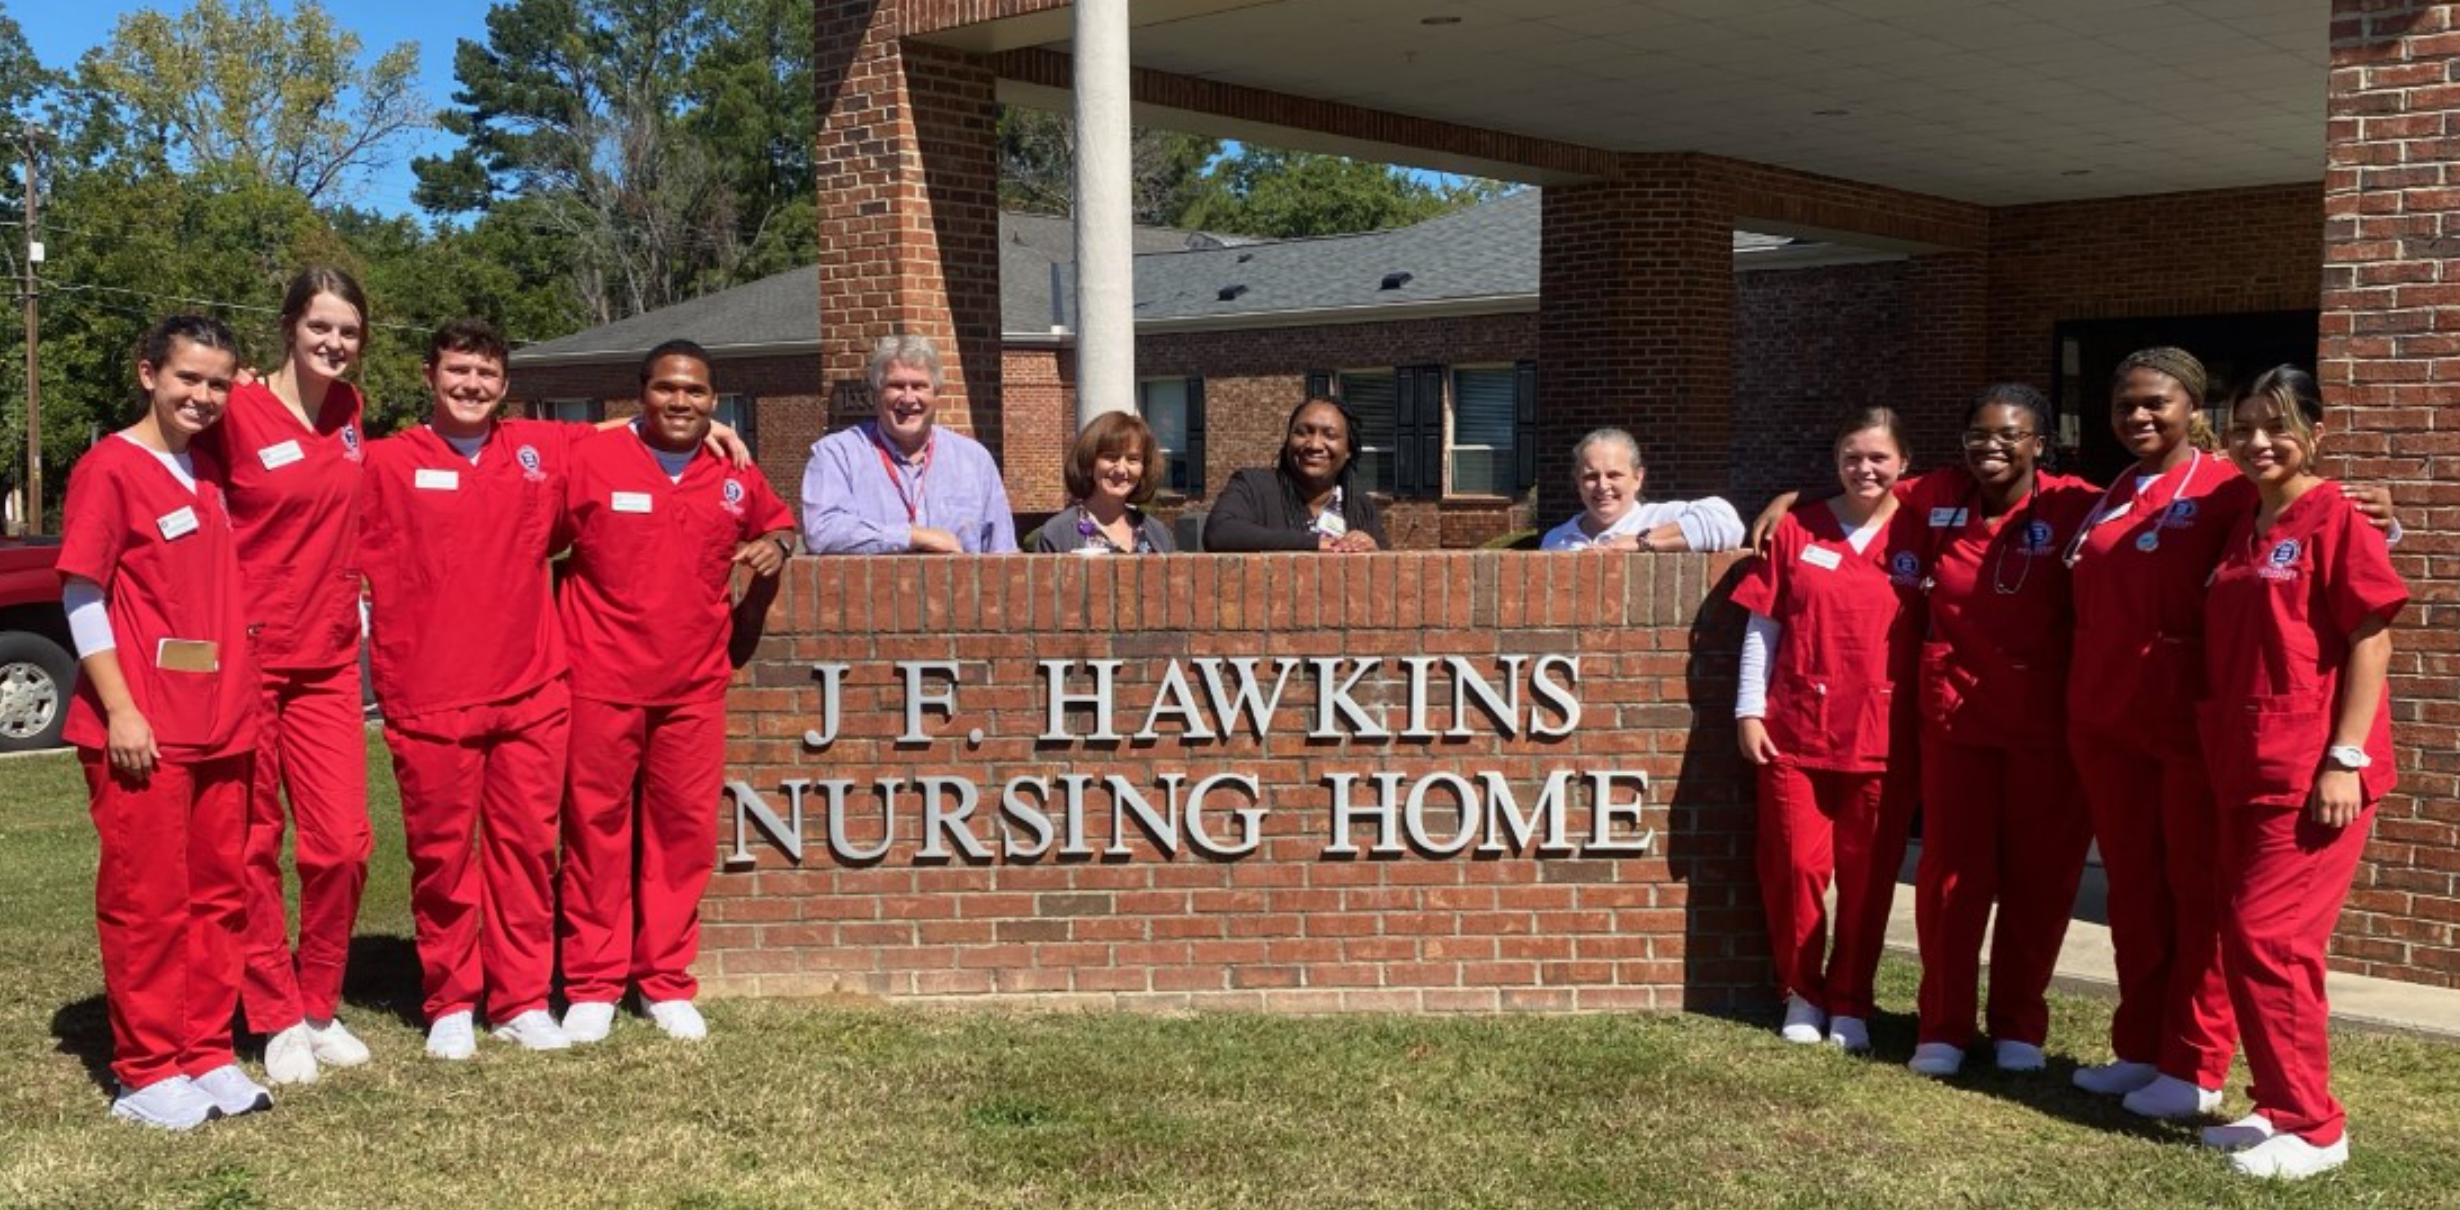 Newberry College nursing students will gain continuum of care experience through clinical partnership with J. F. Hawking and Springfield Place.